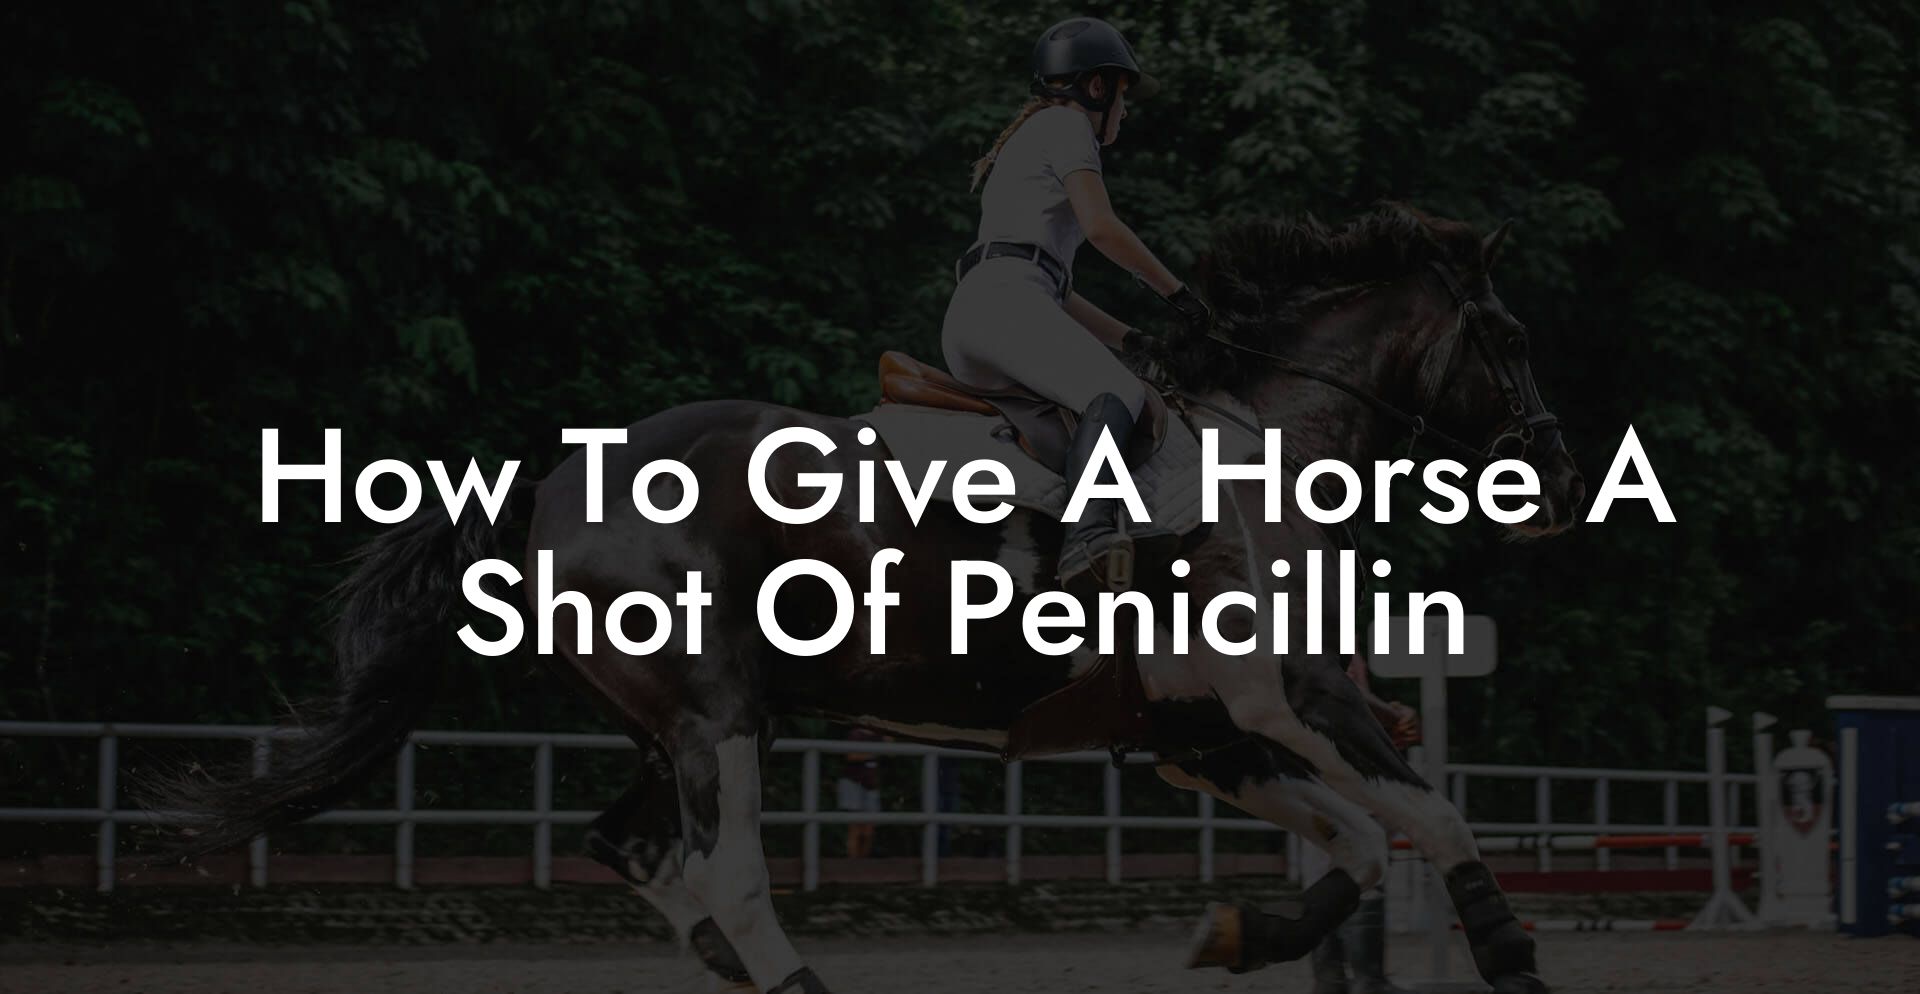 How To Give A Horse A Shot Of Penicillin